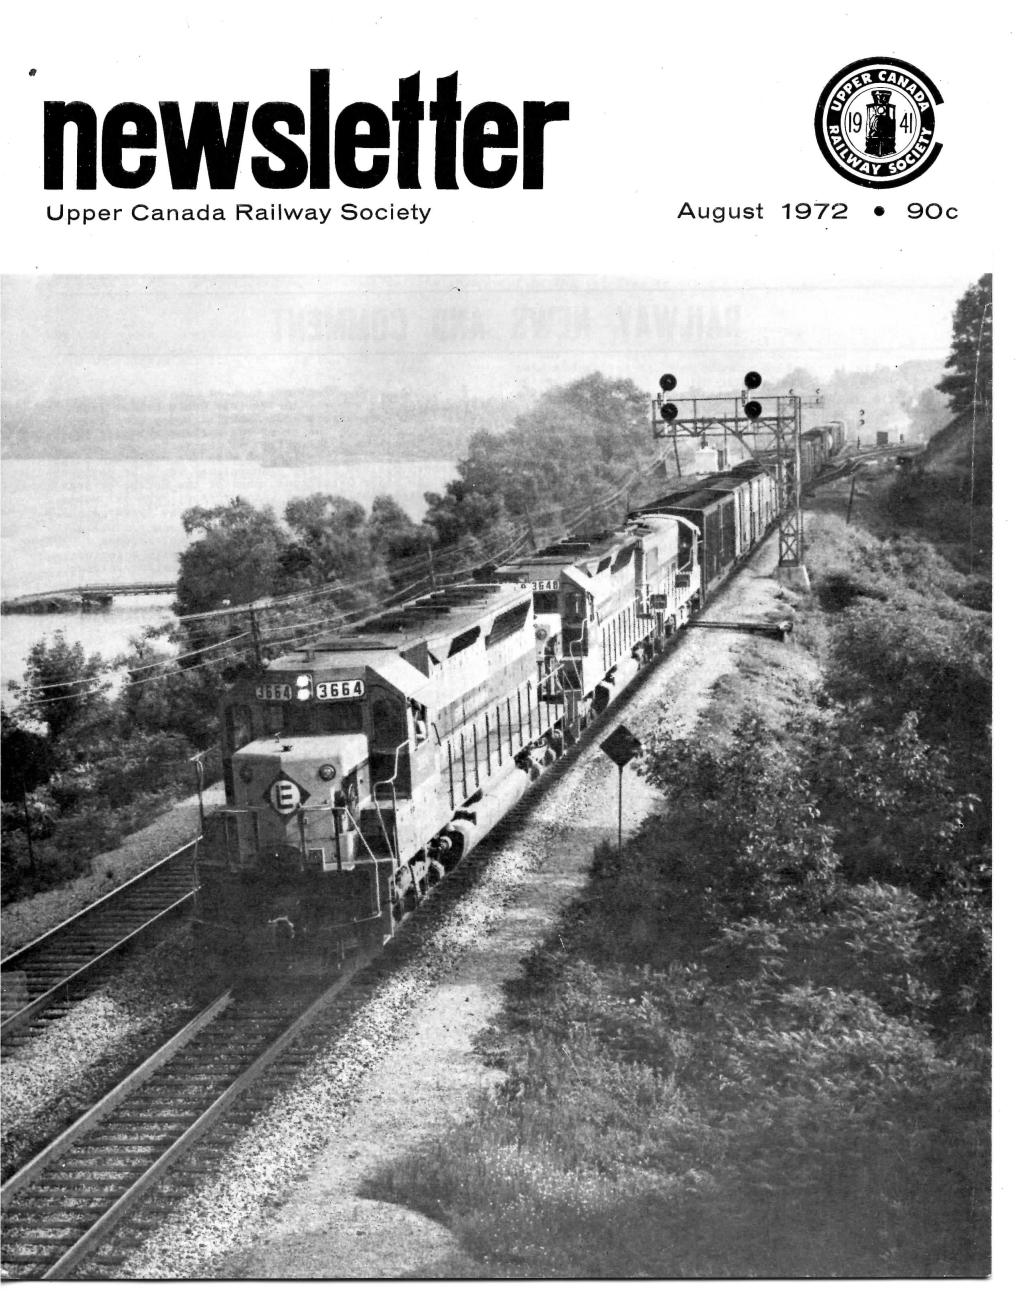 NEWSLETTER Is Published Monthly by the Upper Canada Railway Society Inc., Box 122, Terminal A, Toronto 116, Ontario